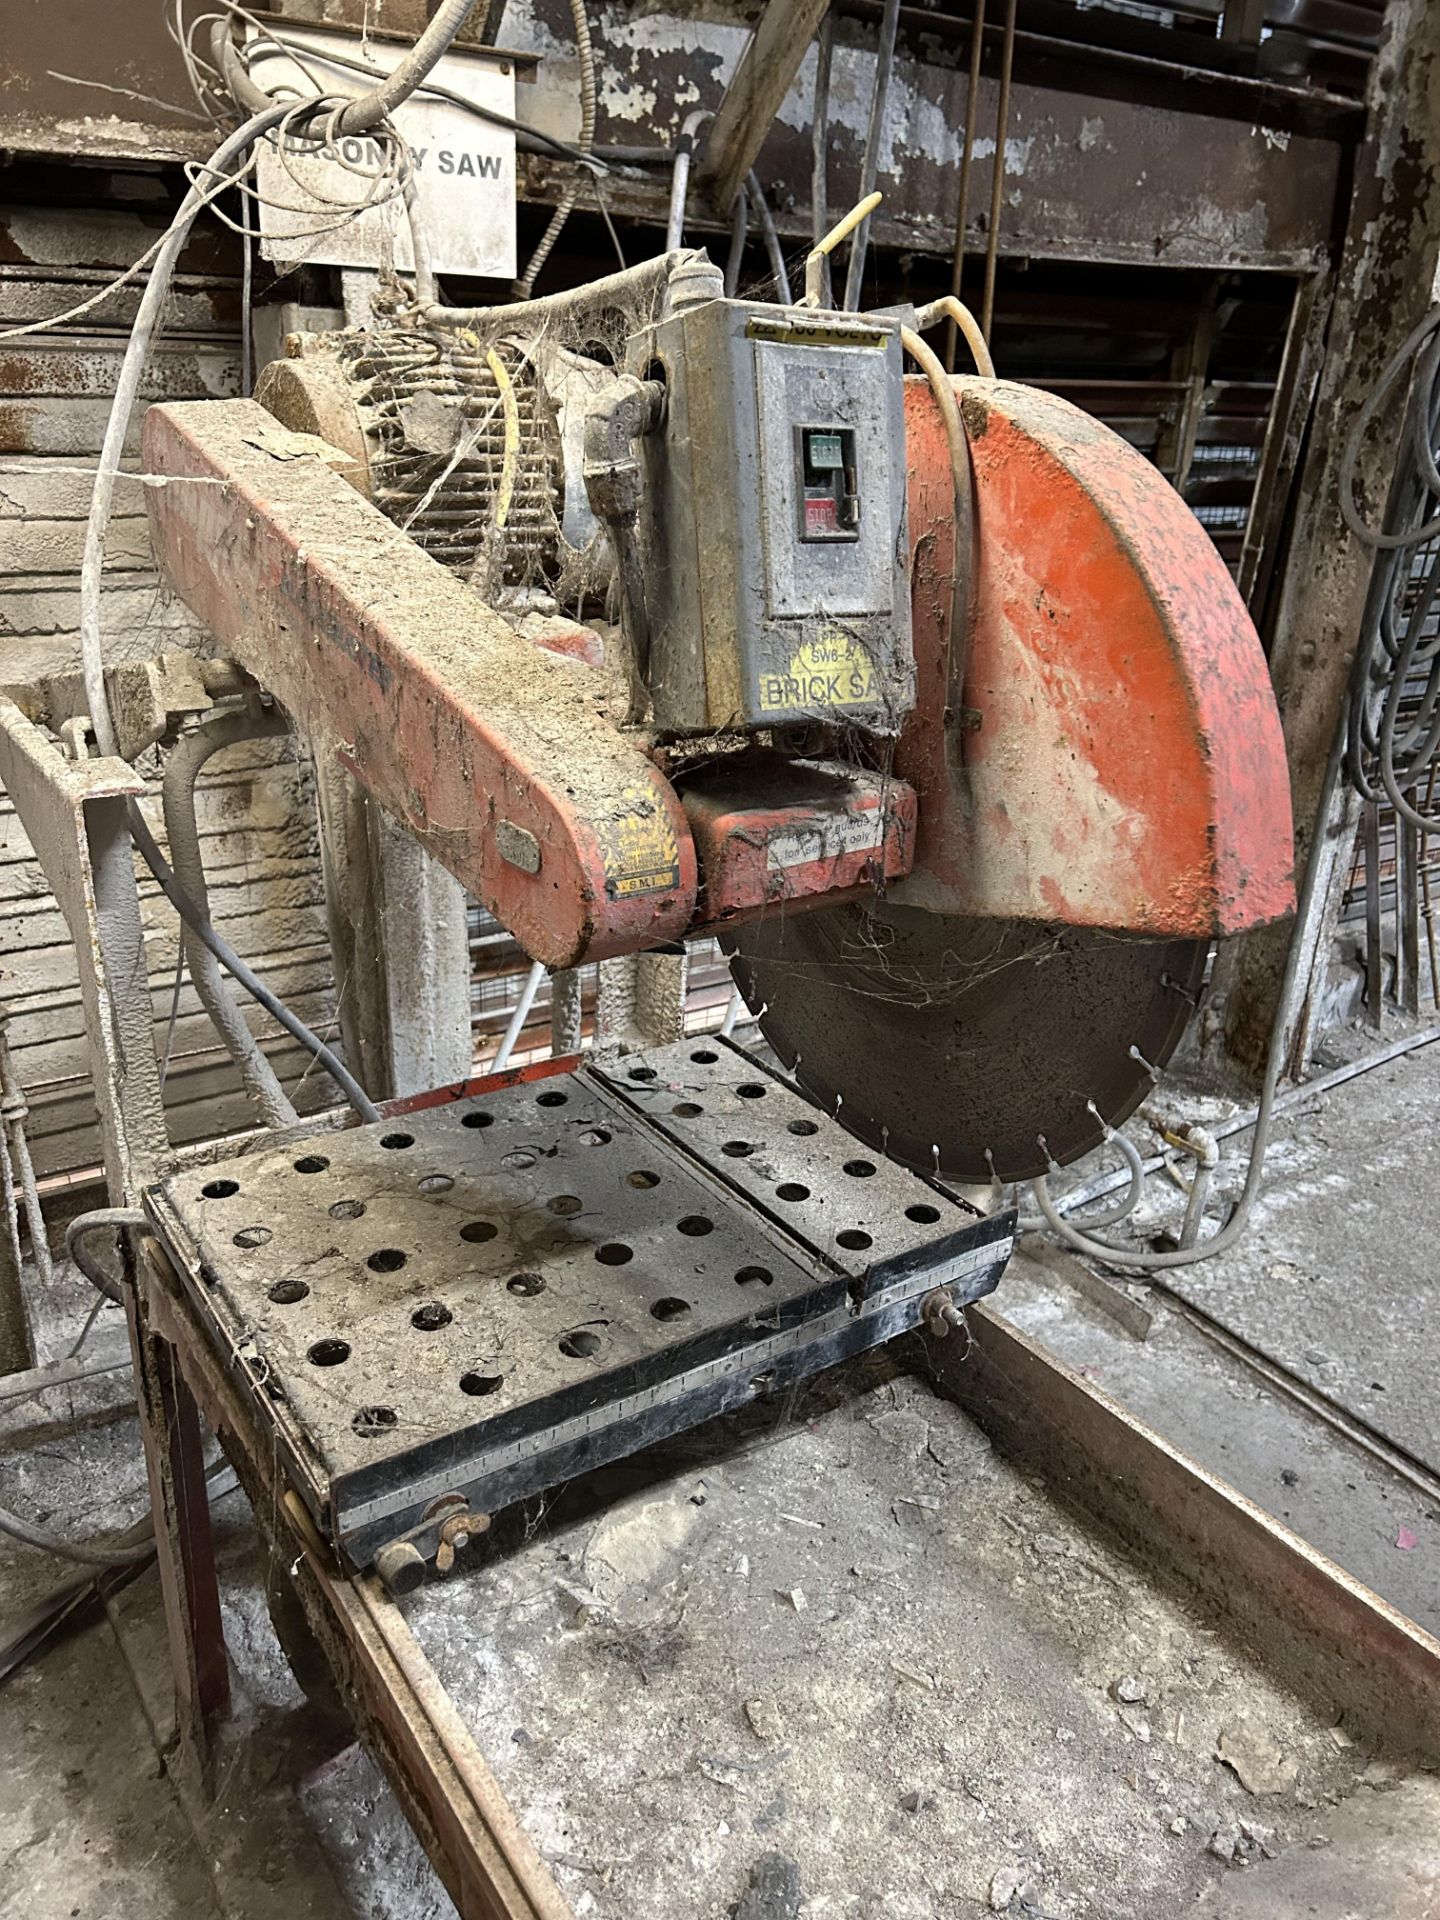 Brick Saw, Rigging/ Removal Fee - $150 - Image 2 of 4